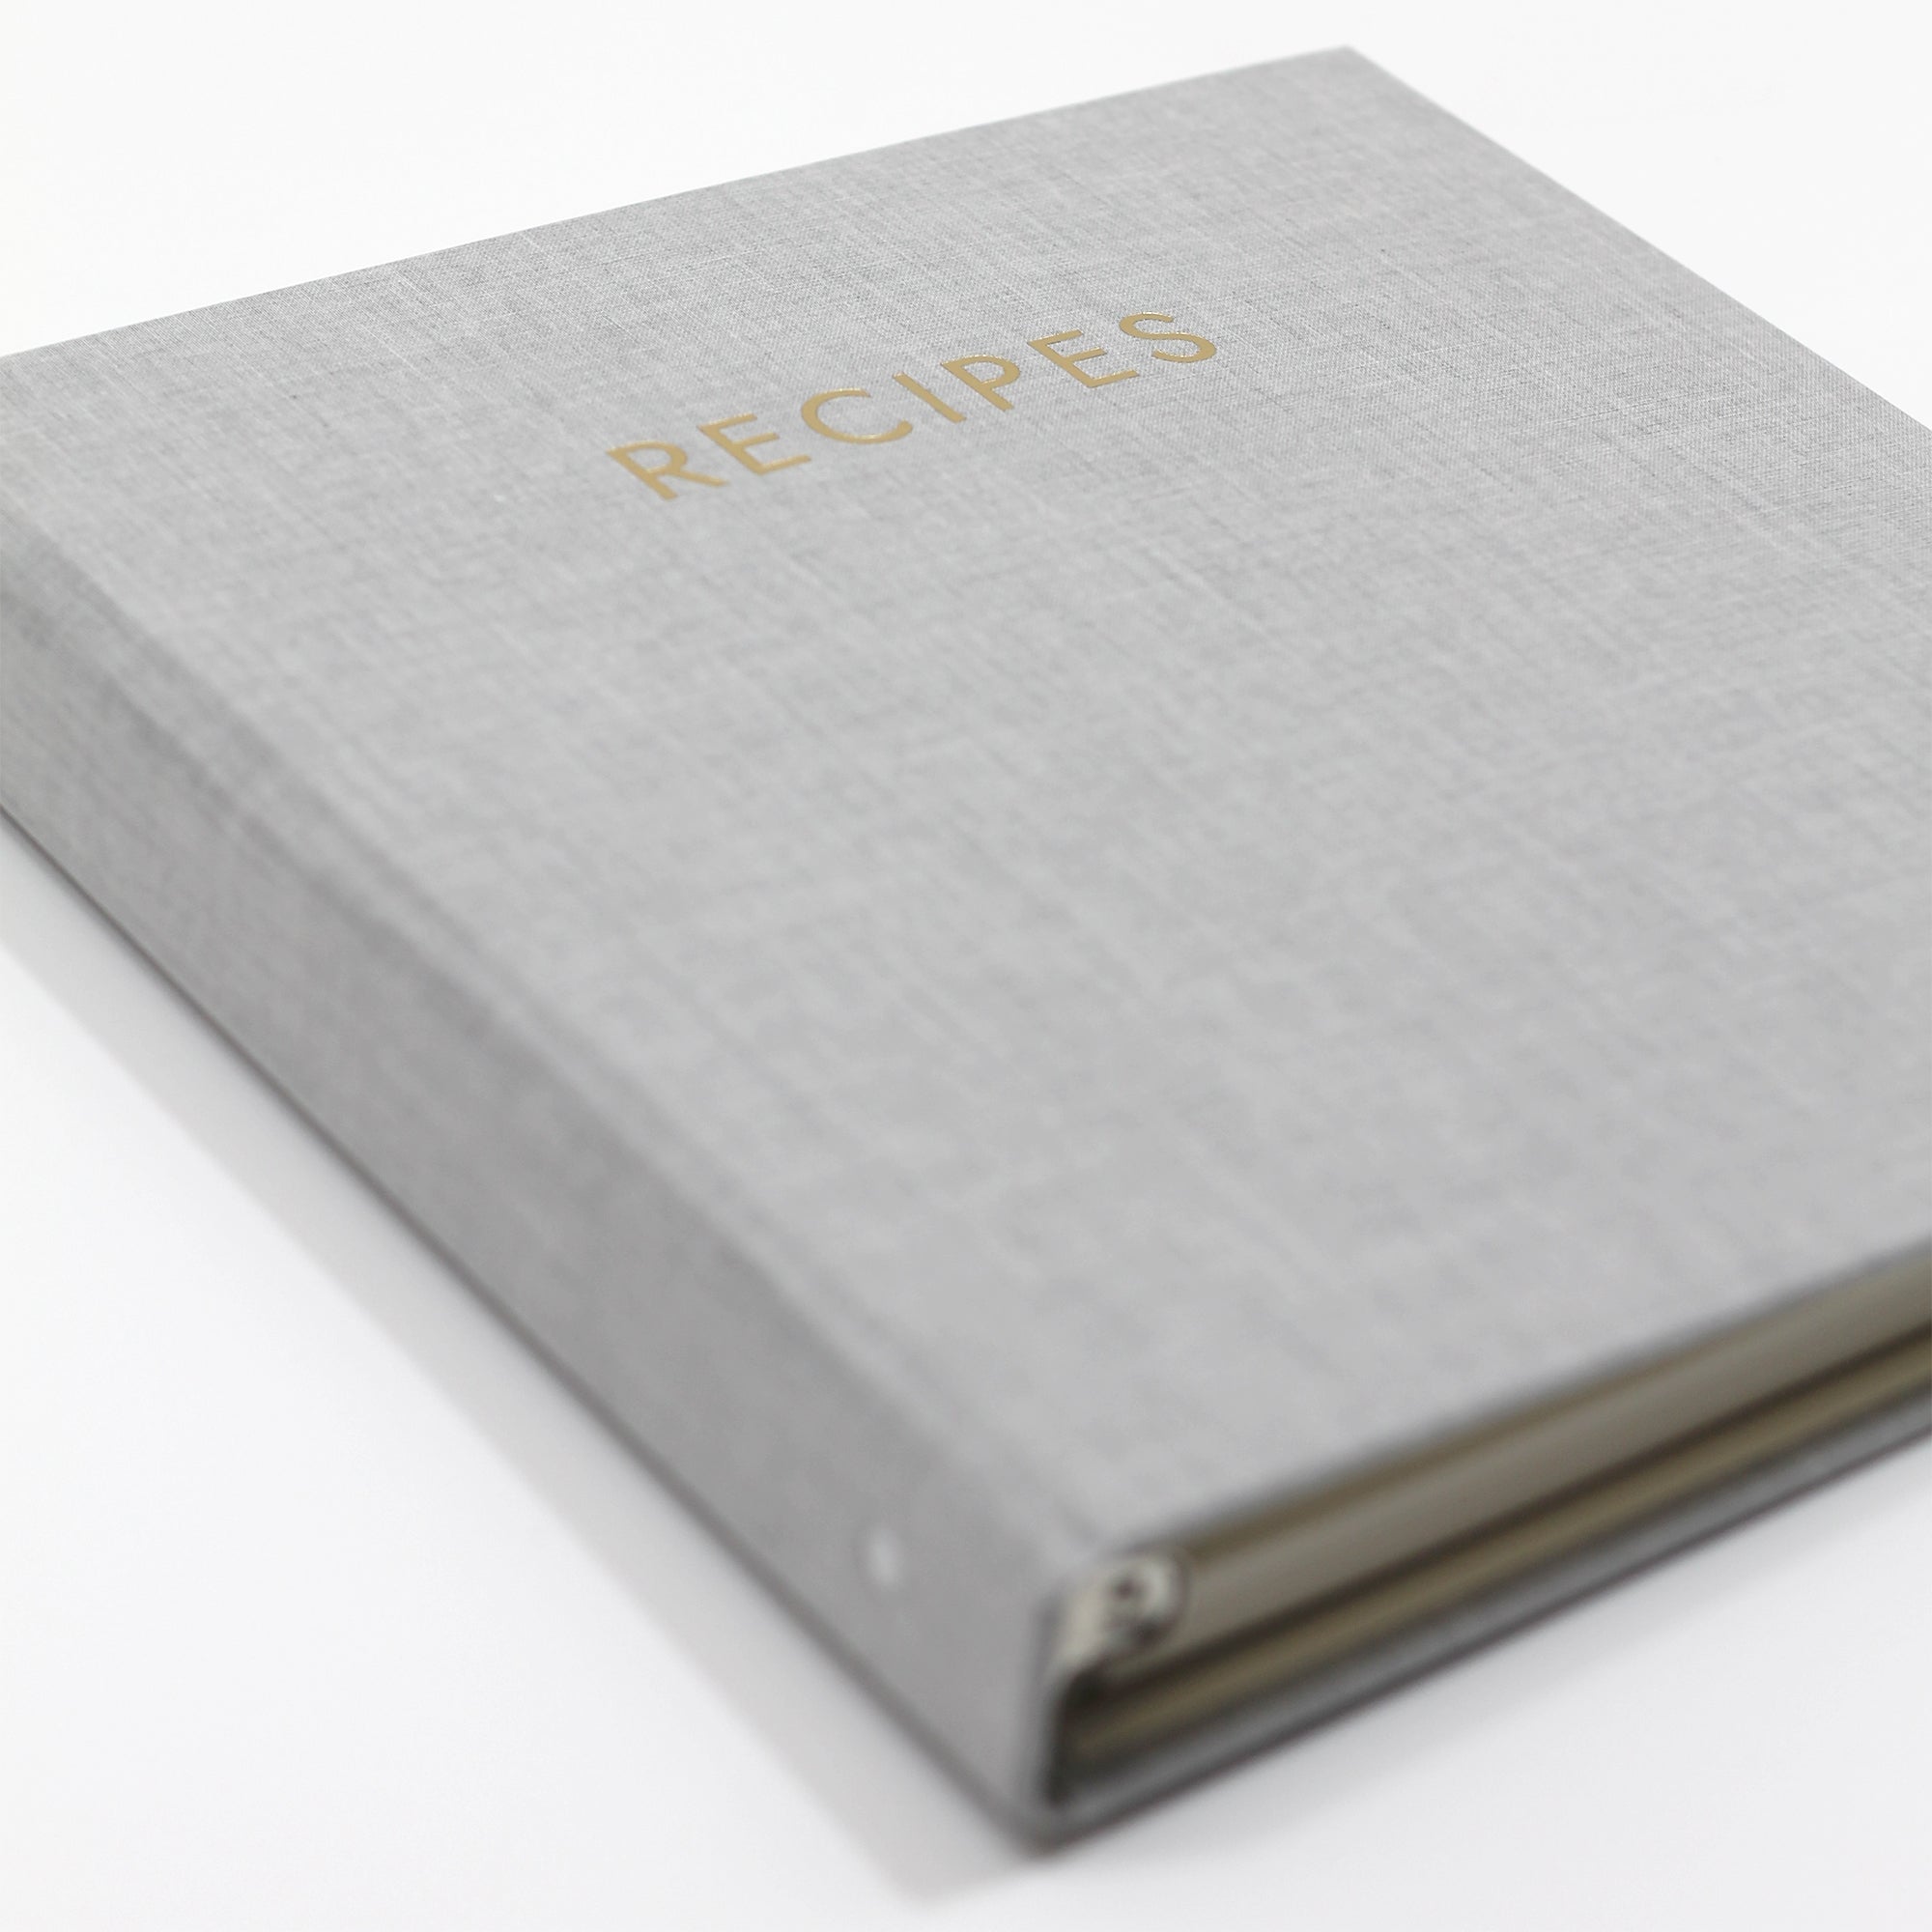 Recipe Journal Embossed with RECIPES covered with Dove Gray Cotton